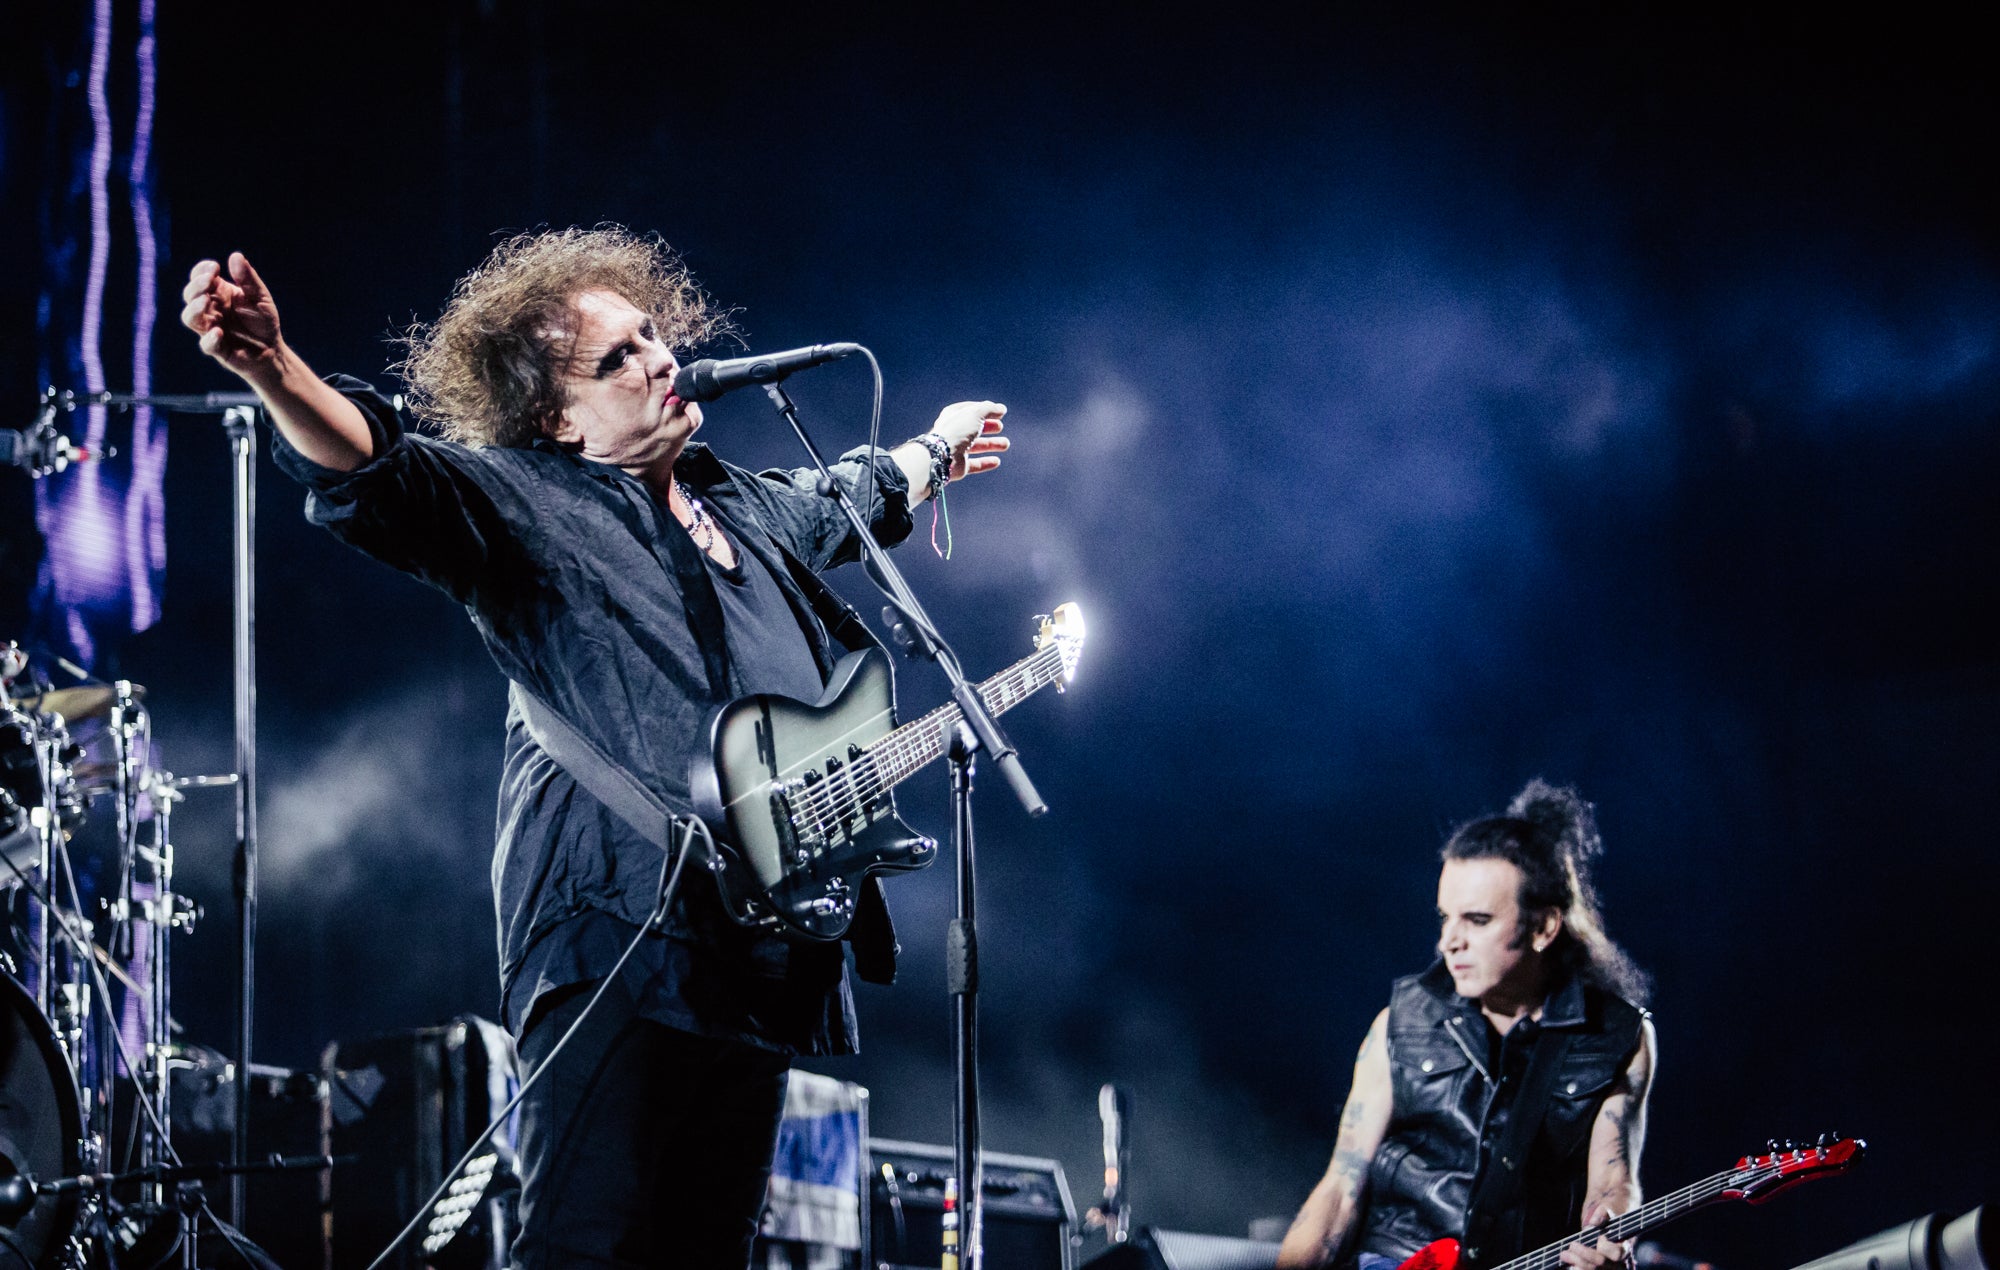 Watch: The Cure Performs ‘Pictures of You’ 30th Anniversary Show